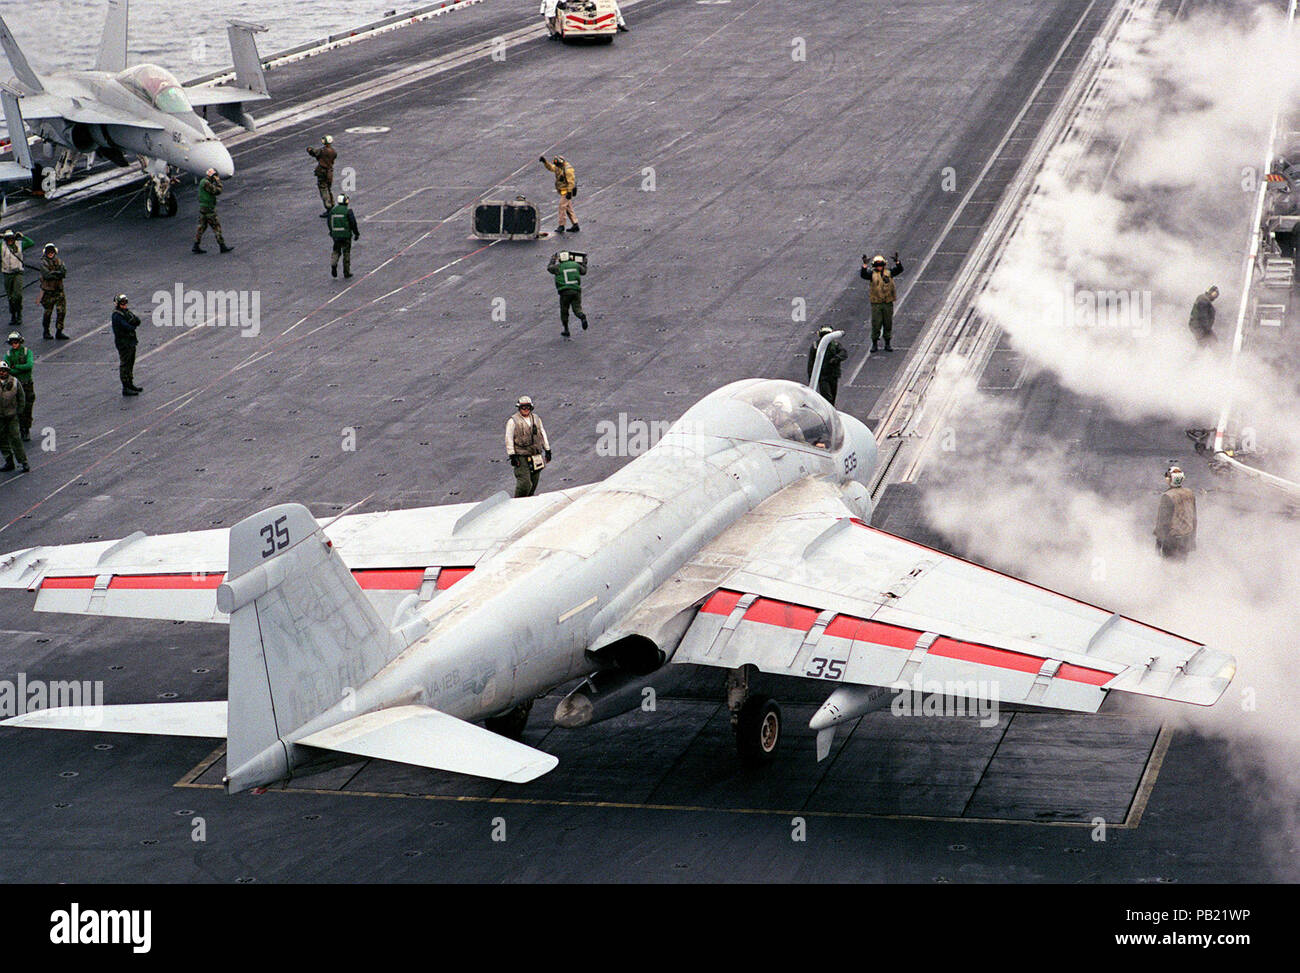 A-6E VA-128 on USS Ranger (CV-61) 1992. An Attack Squadron 128 (VA-128) A-6E Intruder aircraft lines up on a catapult for launch as steam clears from a previous launch on the flight deck of the aircraft carrier USS RANGER (CV-61). Stock Photo